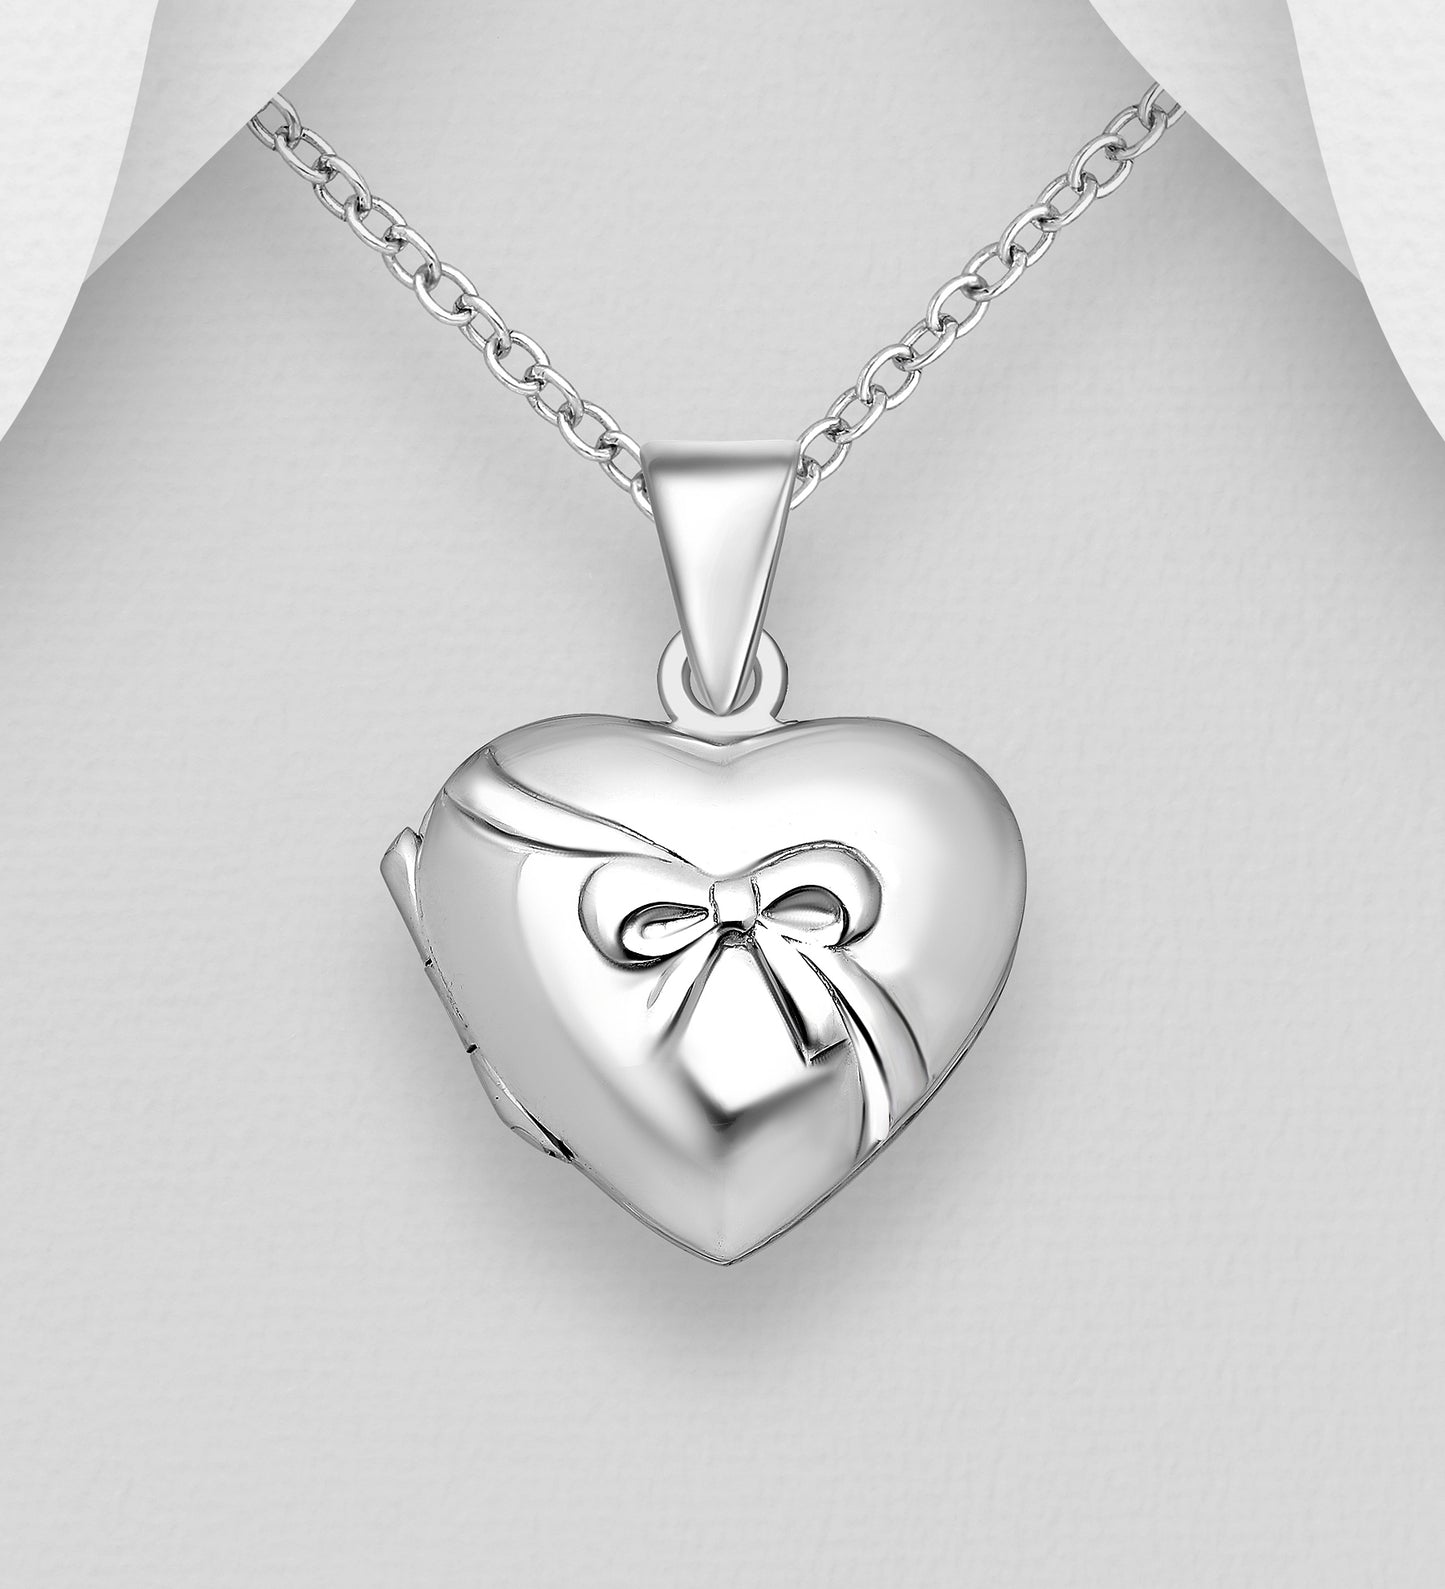 Silver heart shaped locket with bow embellishment. 